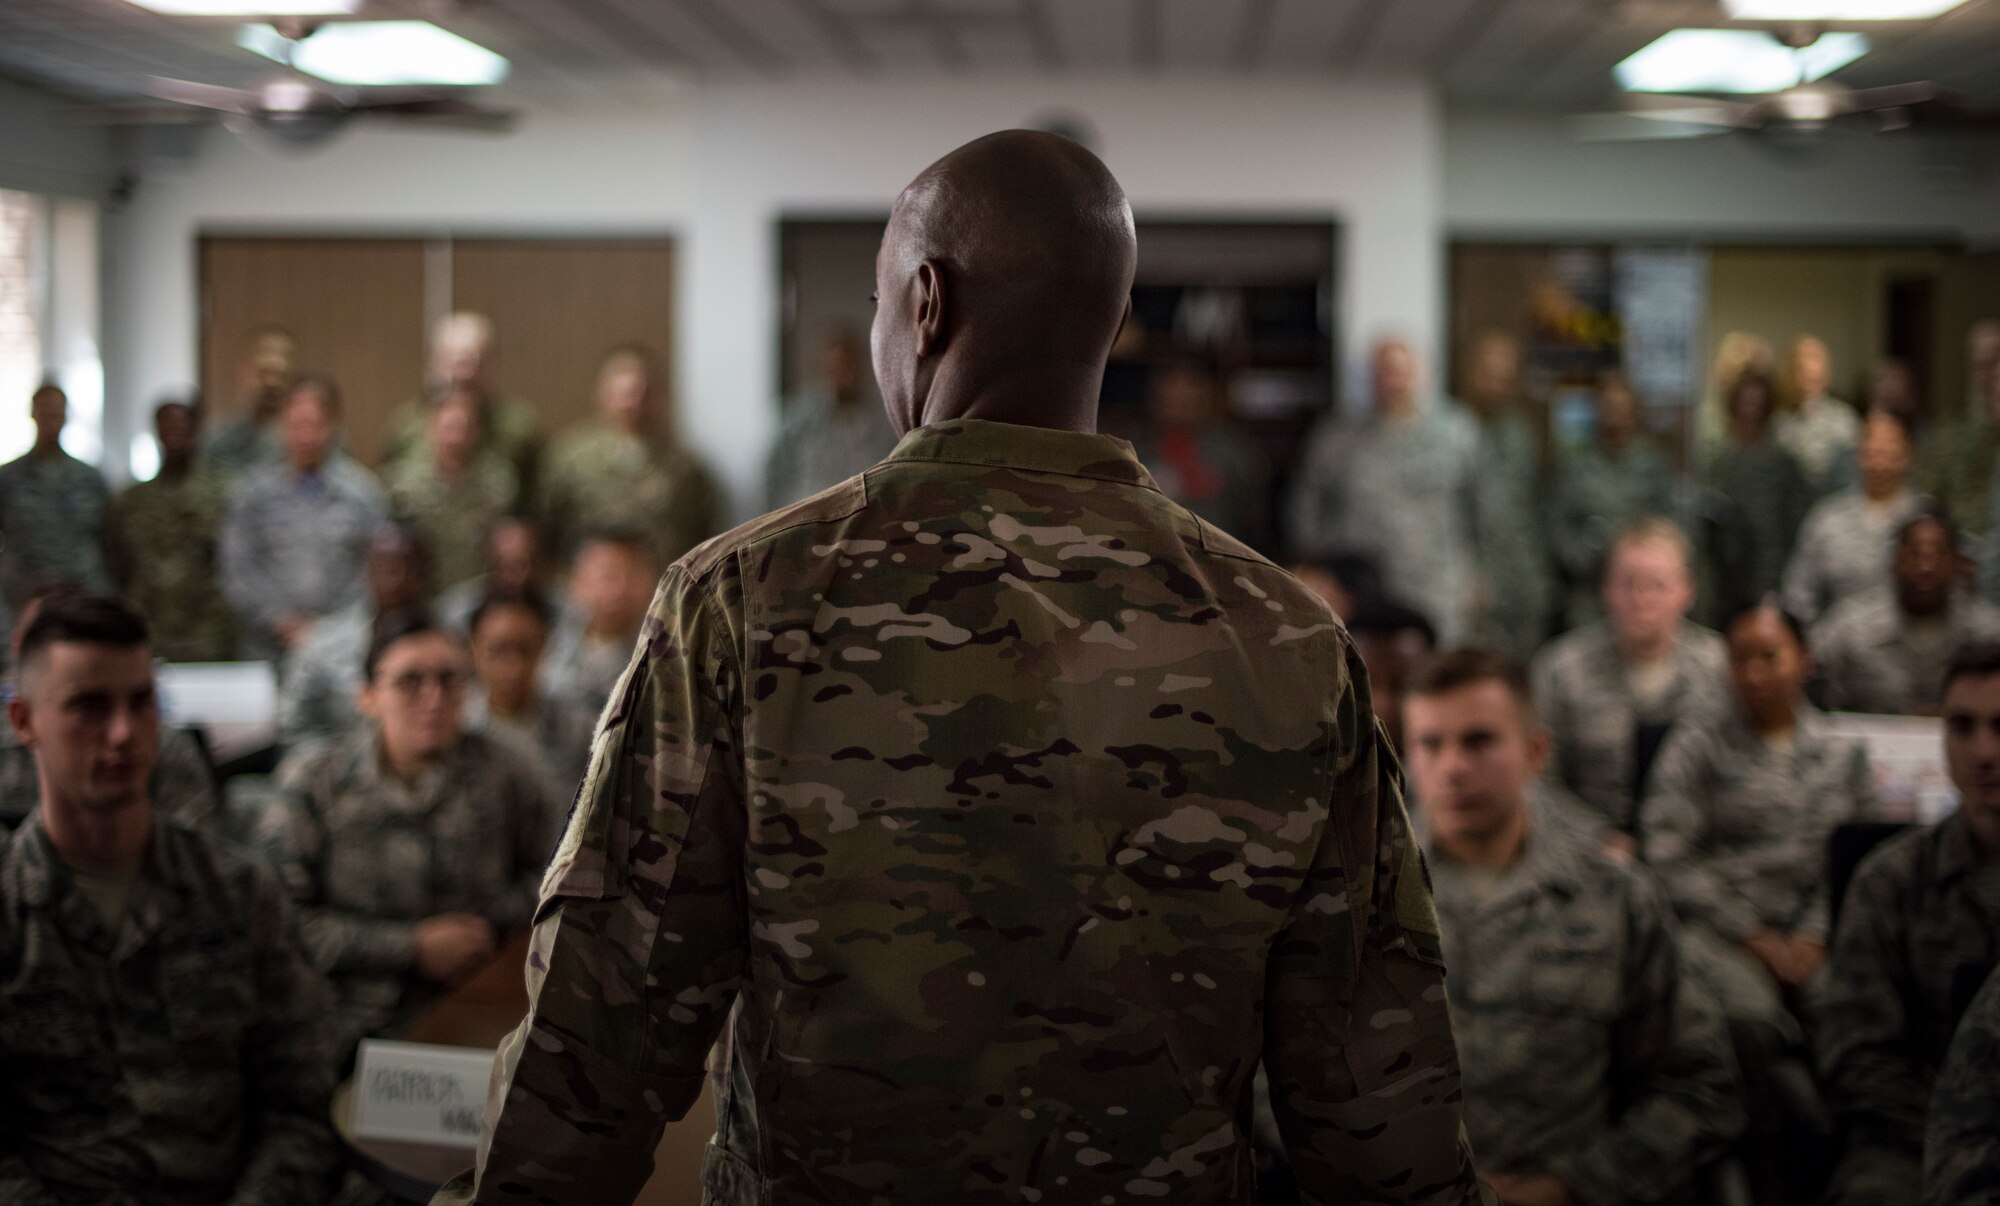 Chief Master Sgt. of the Air Force Kaleth O. Wright speaks to a group of Airmen in a First-Term Airman’s Course Oct. 19, 2018, at Nellis Air Force Base, Nevada. Airmen had the opportunity to ask questions about Air Force regulations and what to look forward to as a first-term Airman. (U.S. Air Force photo by Airman 1st Class Andrew D. Sarver)